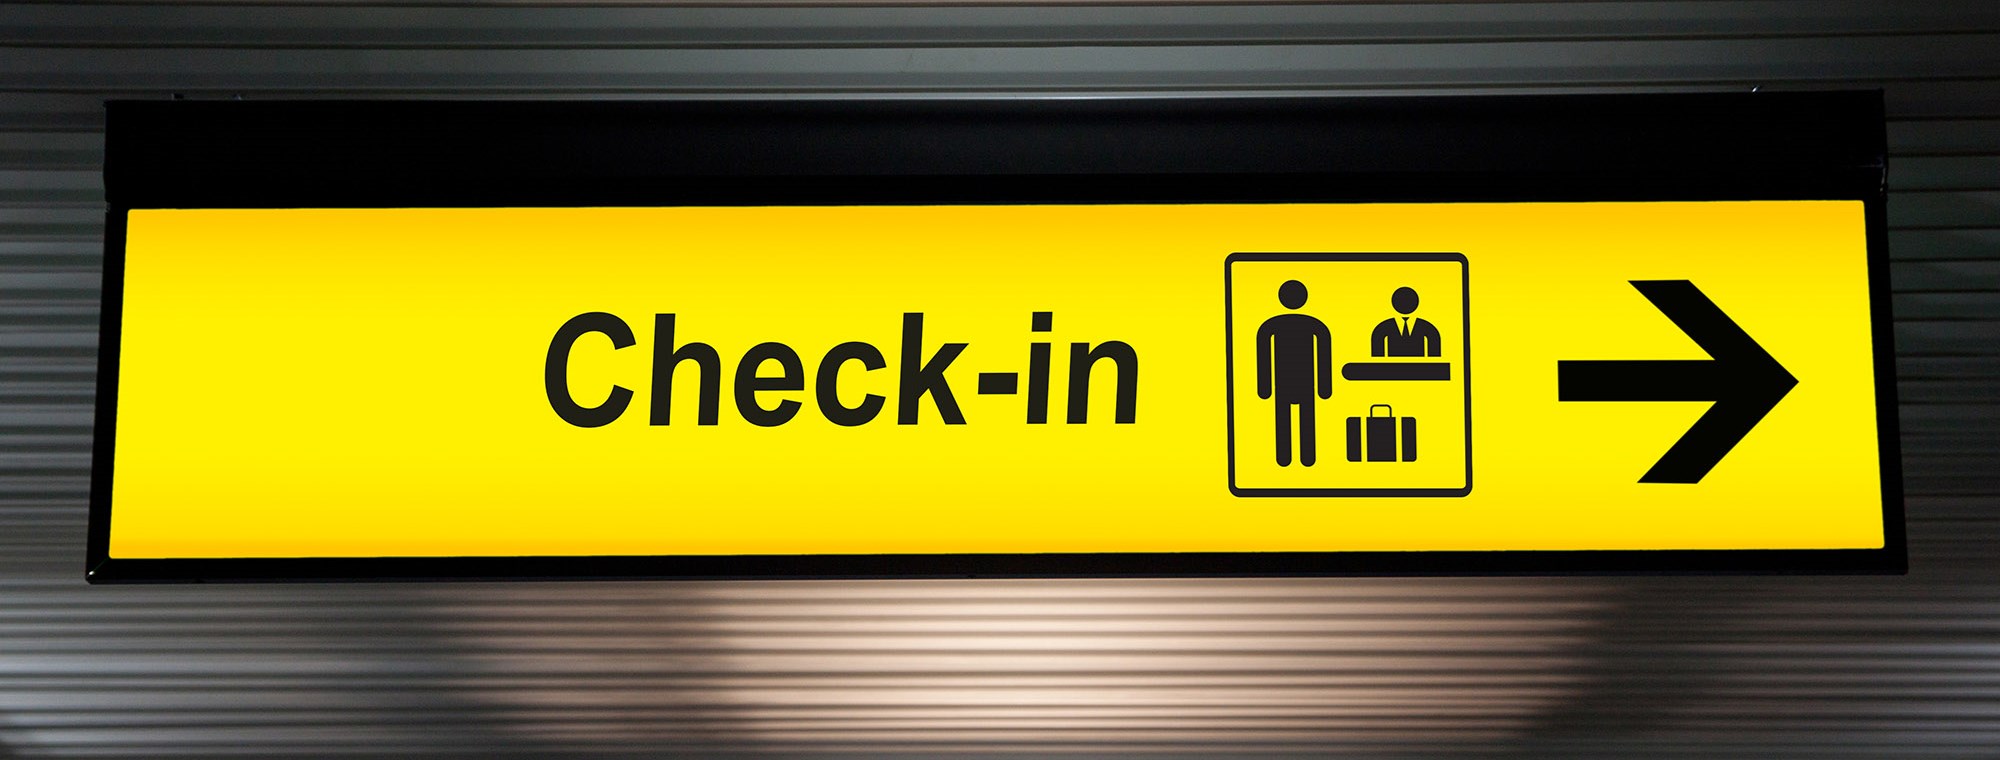 airport-check-in-sign-with-arrow-yellow.jpg